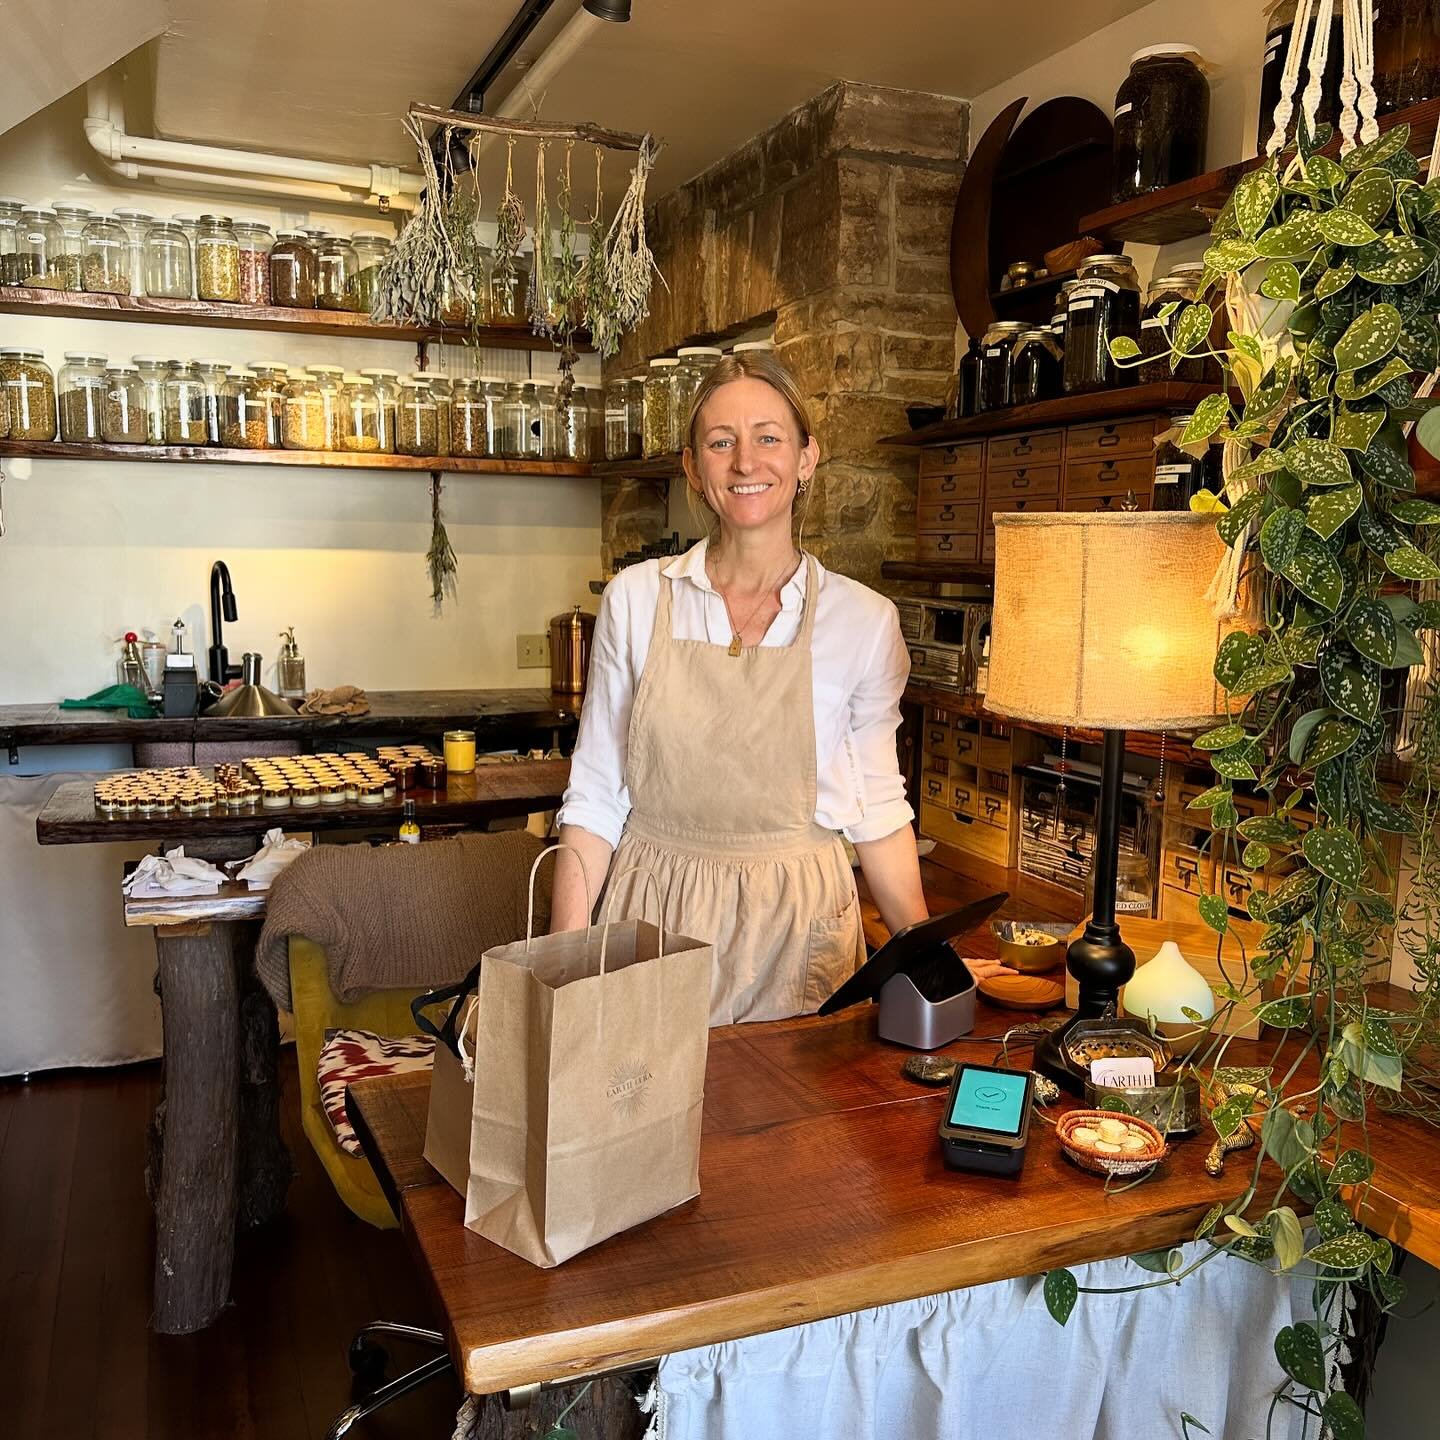 Wow what an amazing new space for Bonnie creator and herbalist at @earthcuraapothecary in her beautiful new space in Carmel. A perfect synergy of products, passion, purpose and peaceful space. Designed beautifully to match with custom wood all around